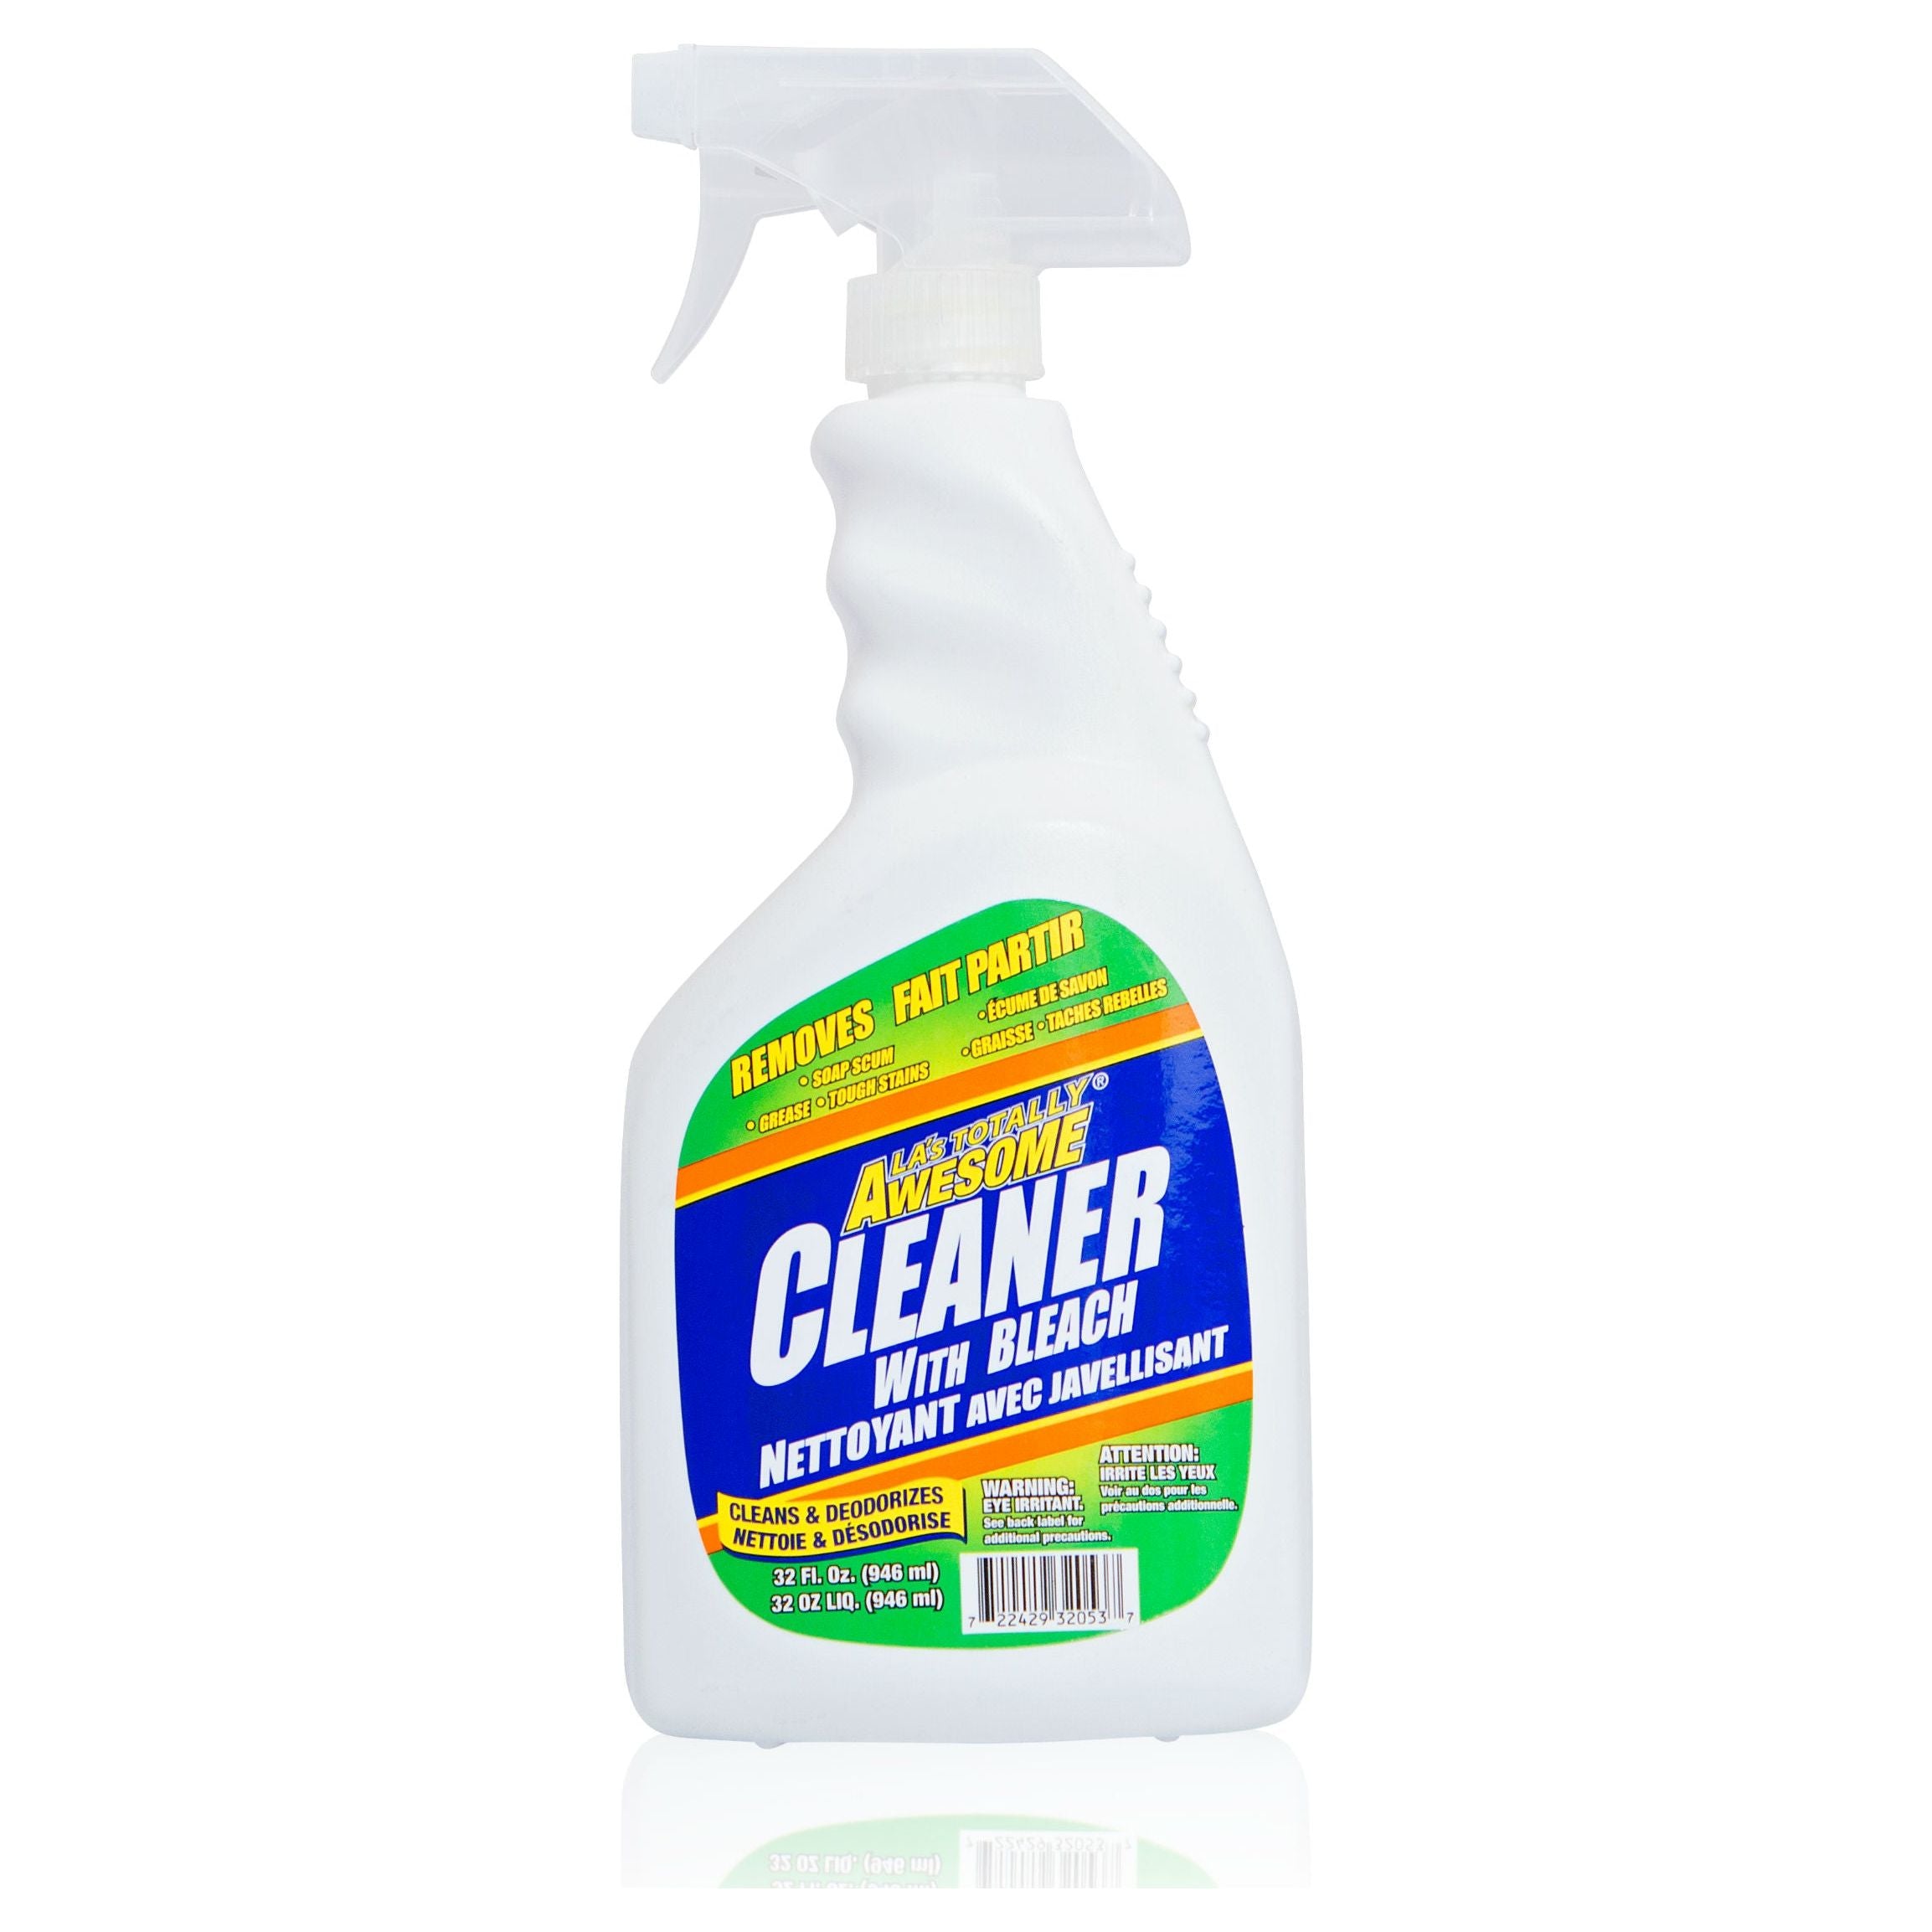 Awesome - Cleaner with Bleach